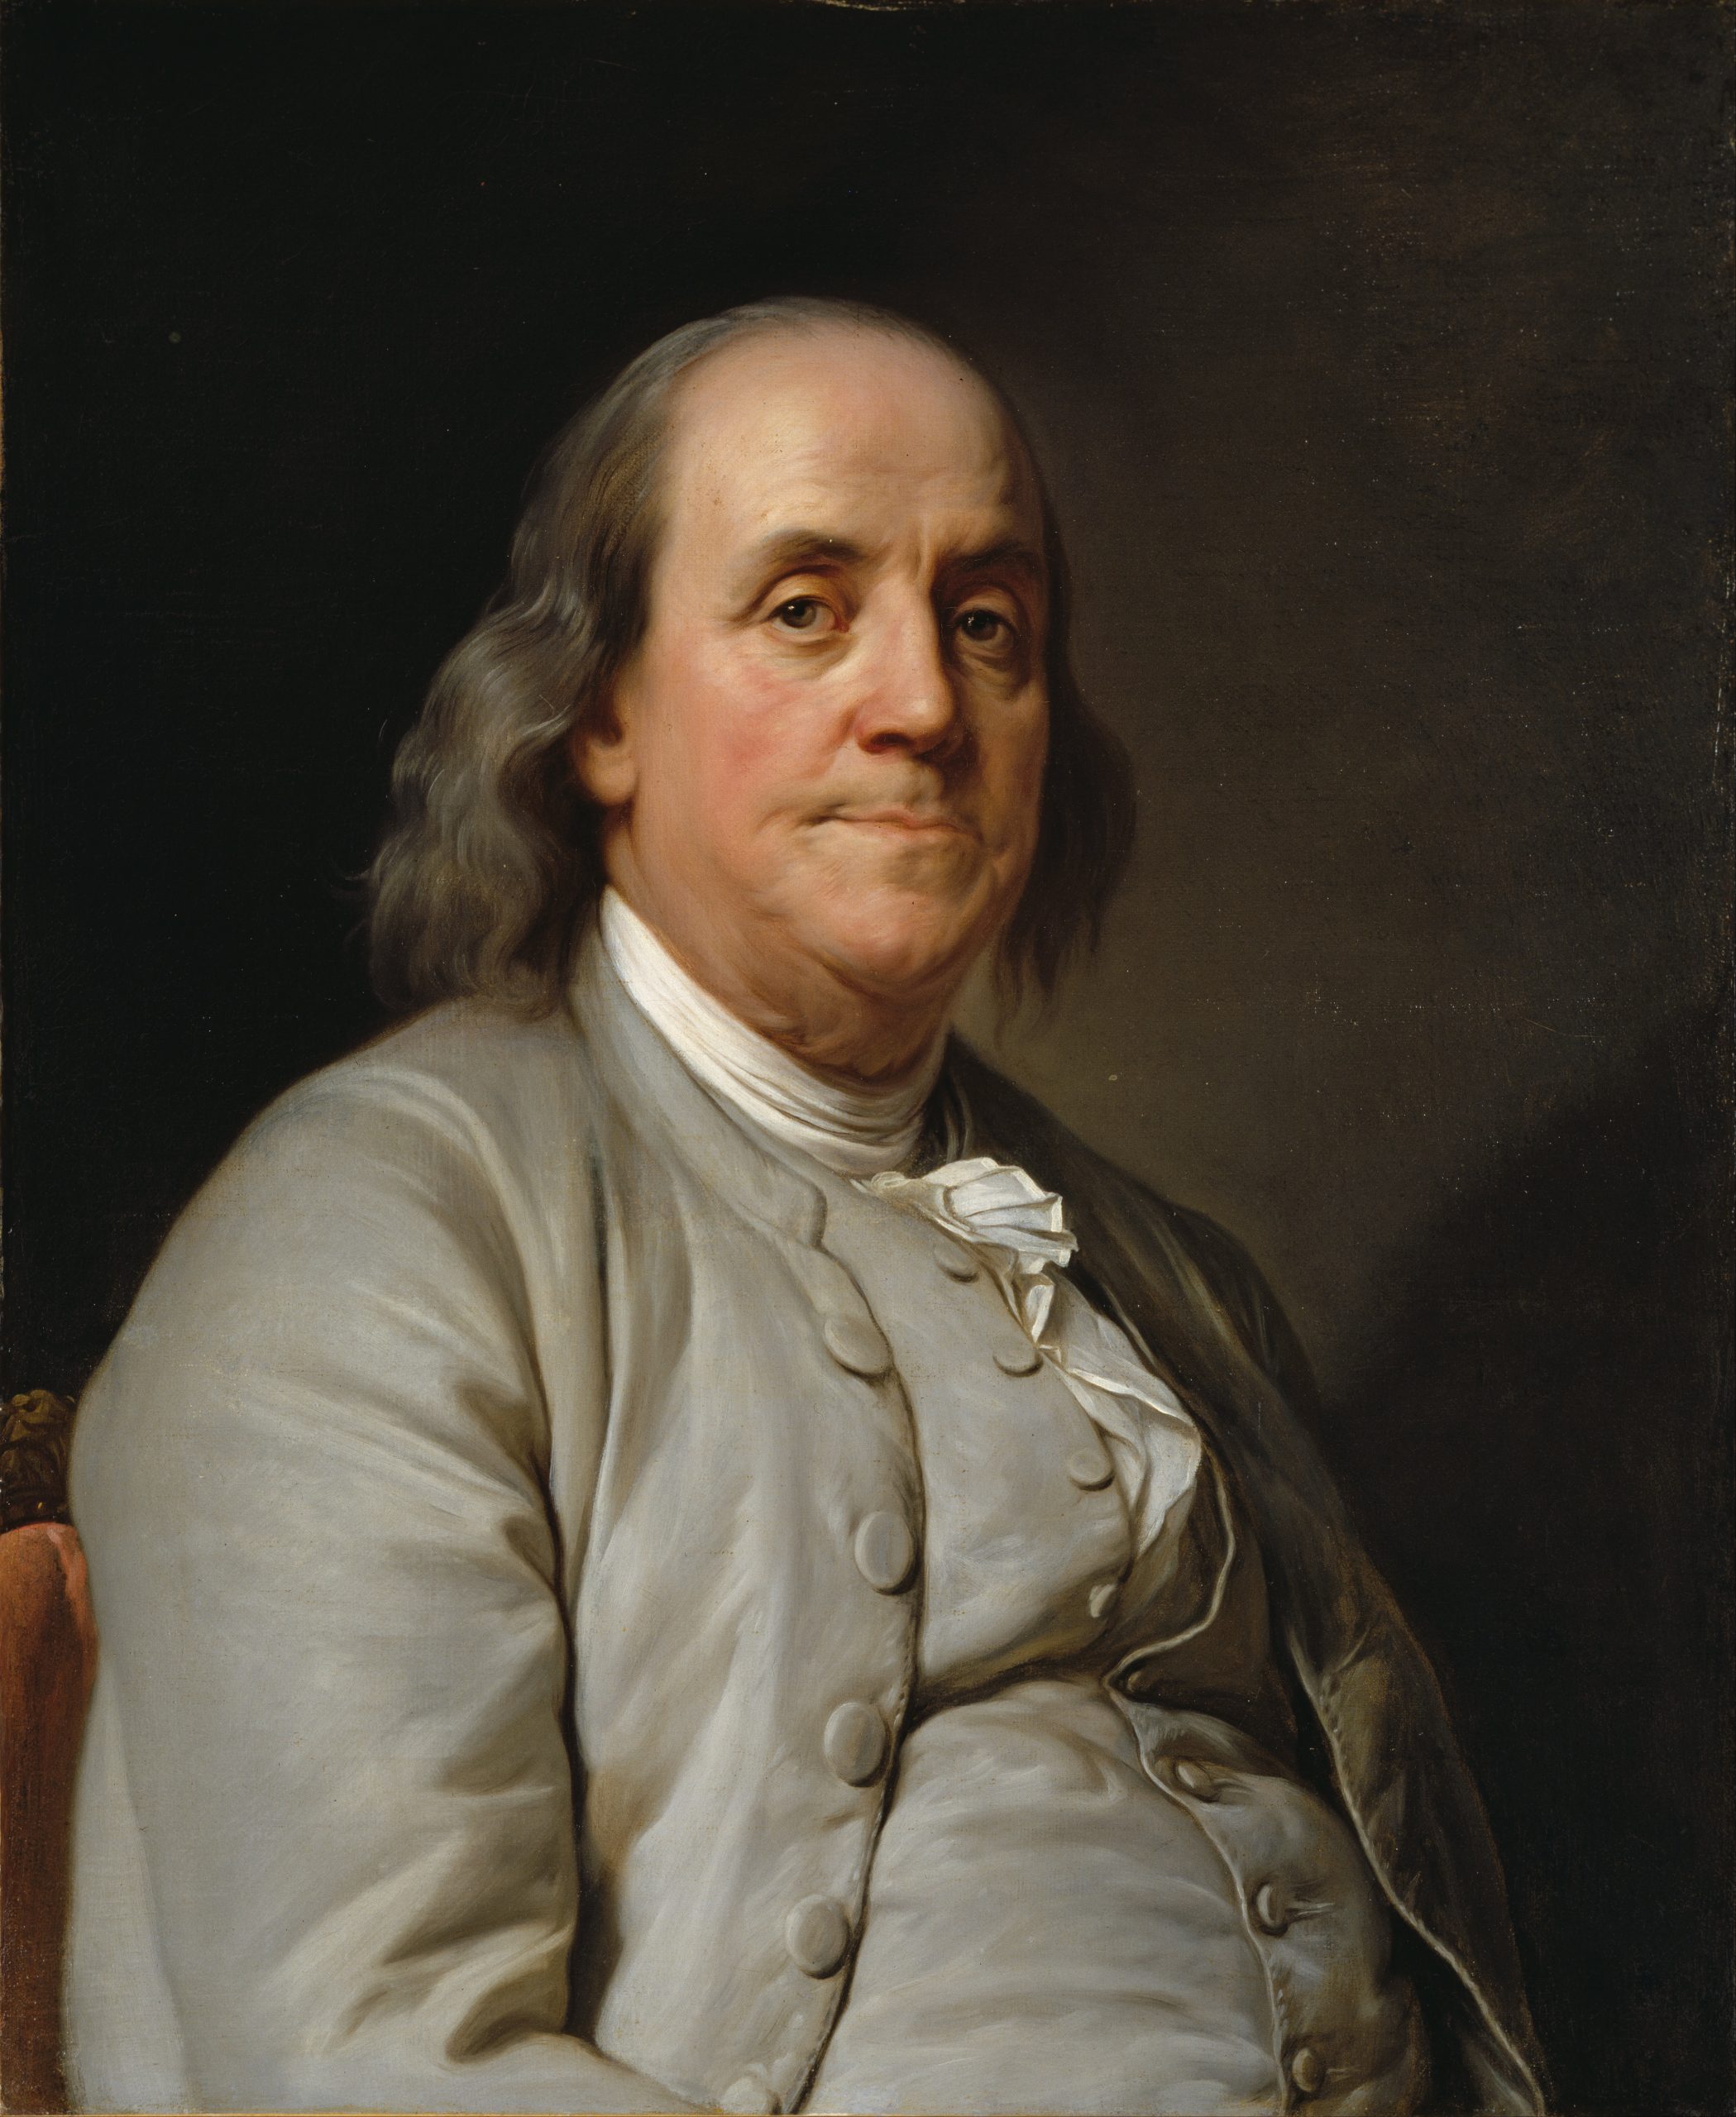 Benjamin Franklin's face was recognized widely before the invention of the photograph because of portraits like this by Joseph Siffred Duplessis.